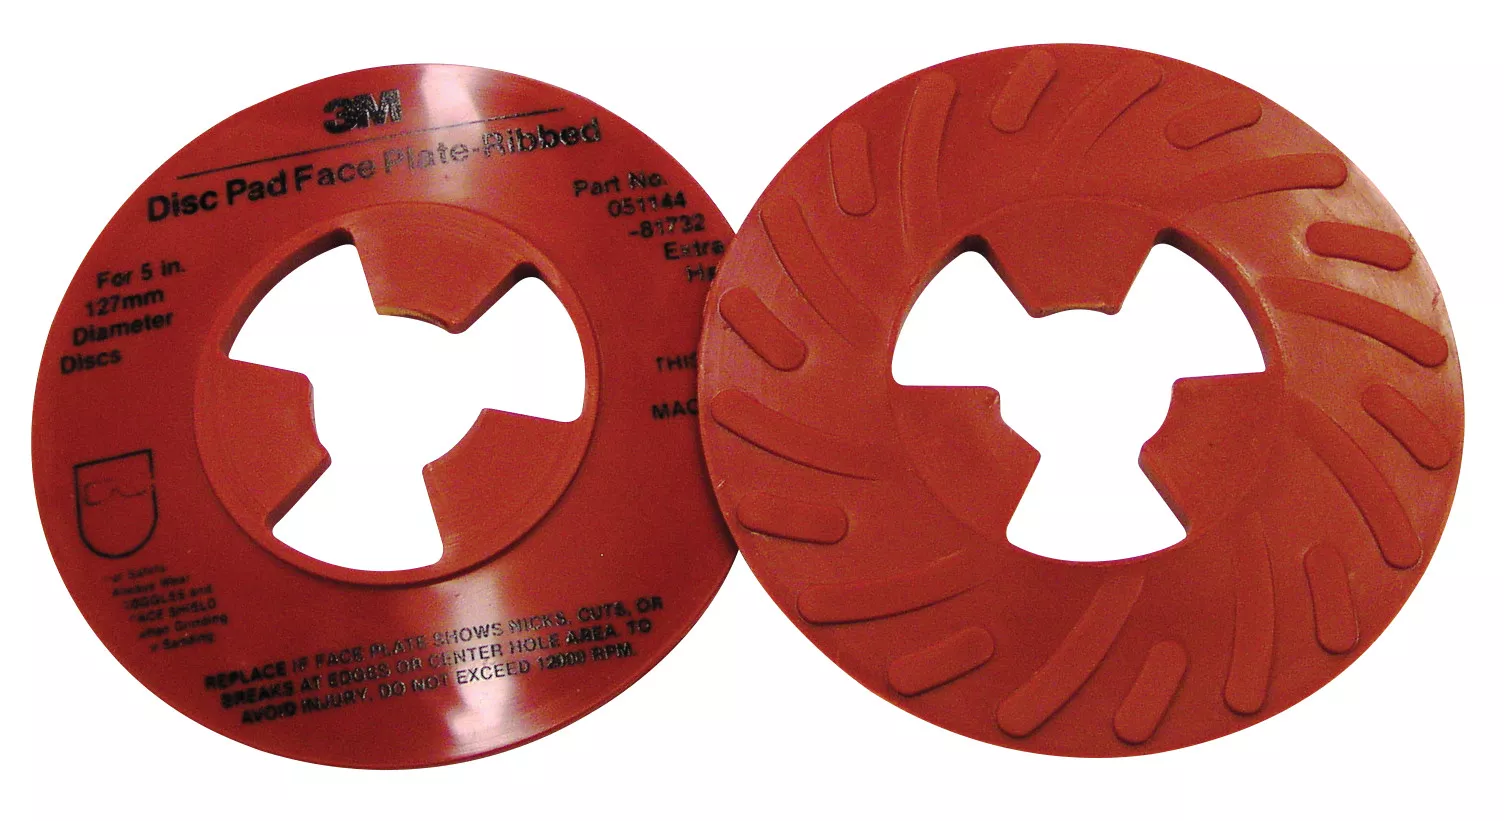 3M™ Disc Pad Face Plate Ribbed 81732, Extra Hard, Red, 5 in, 10 ea/Case